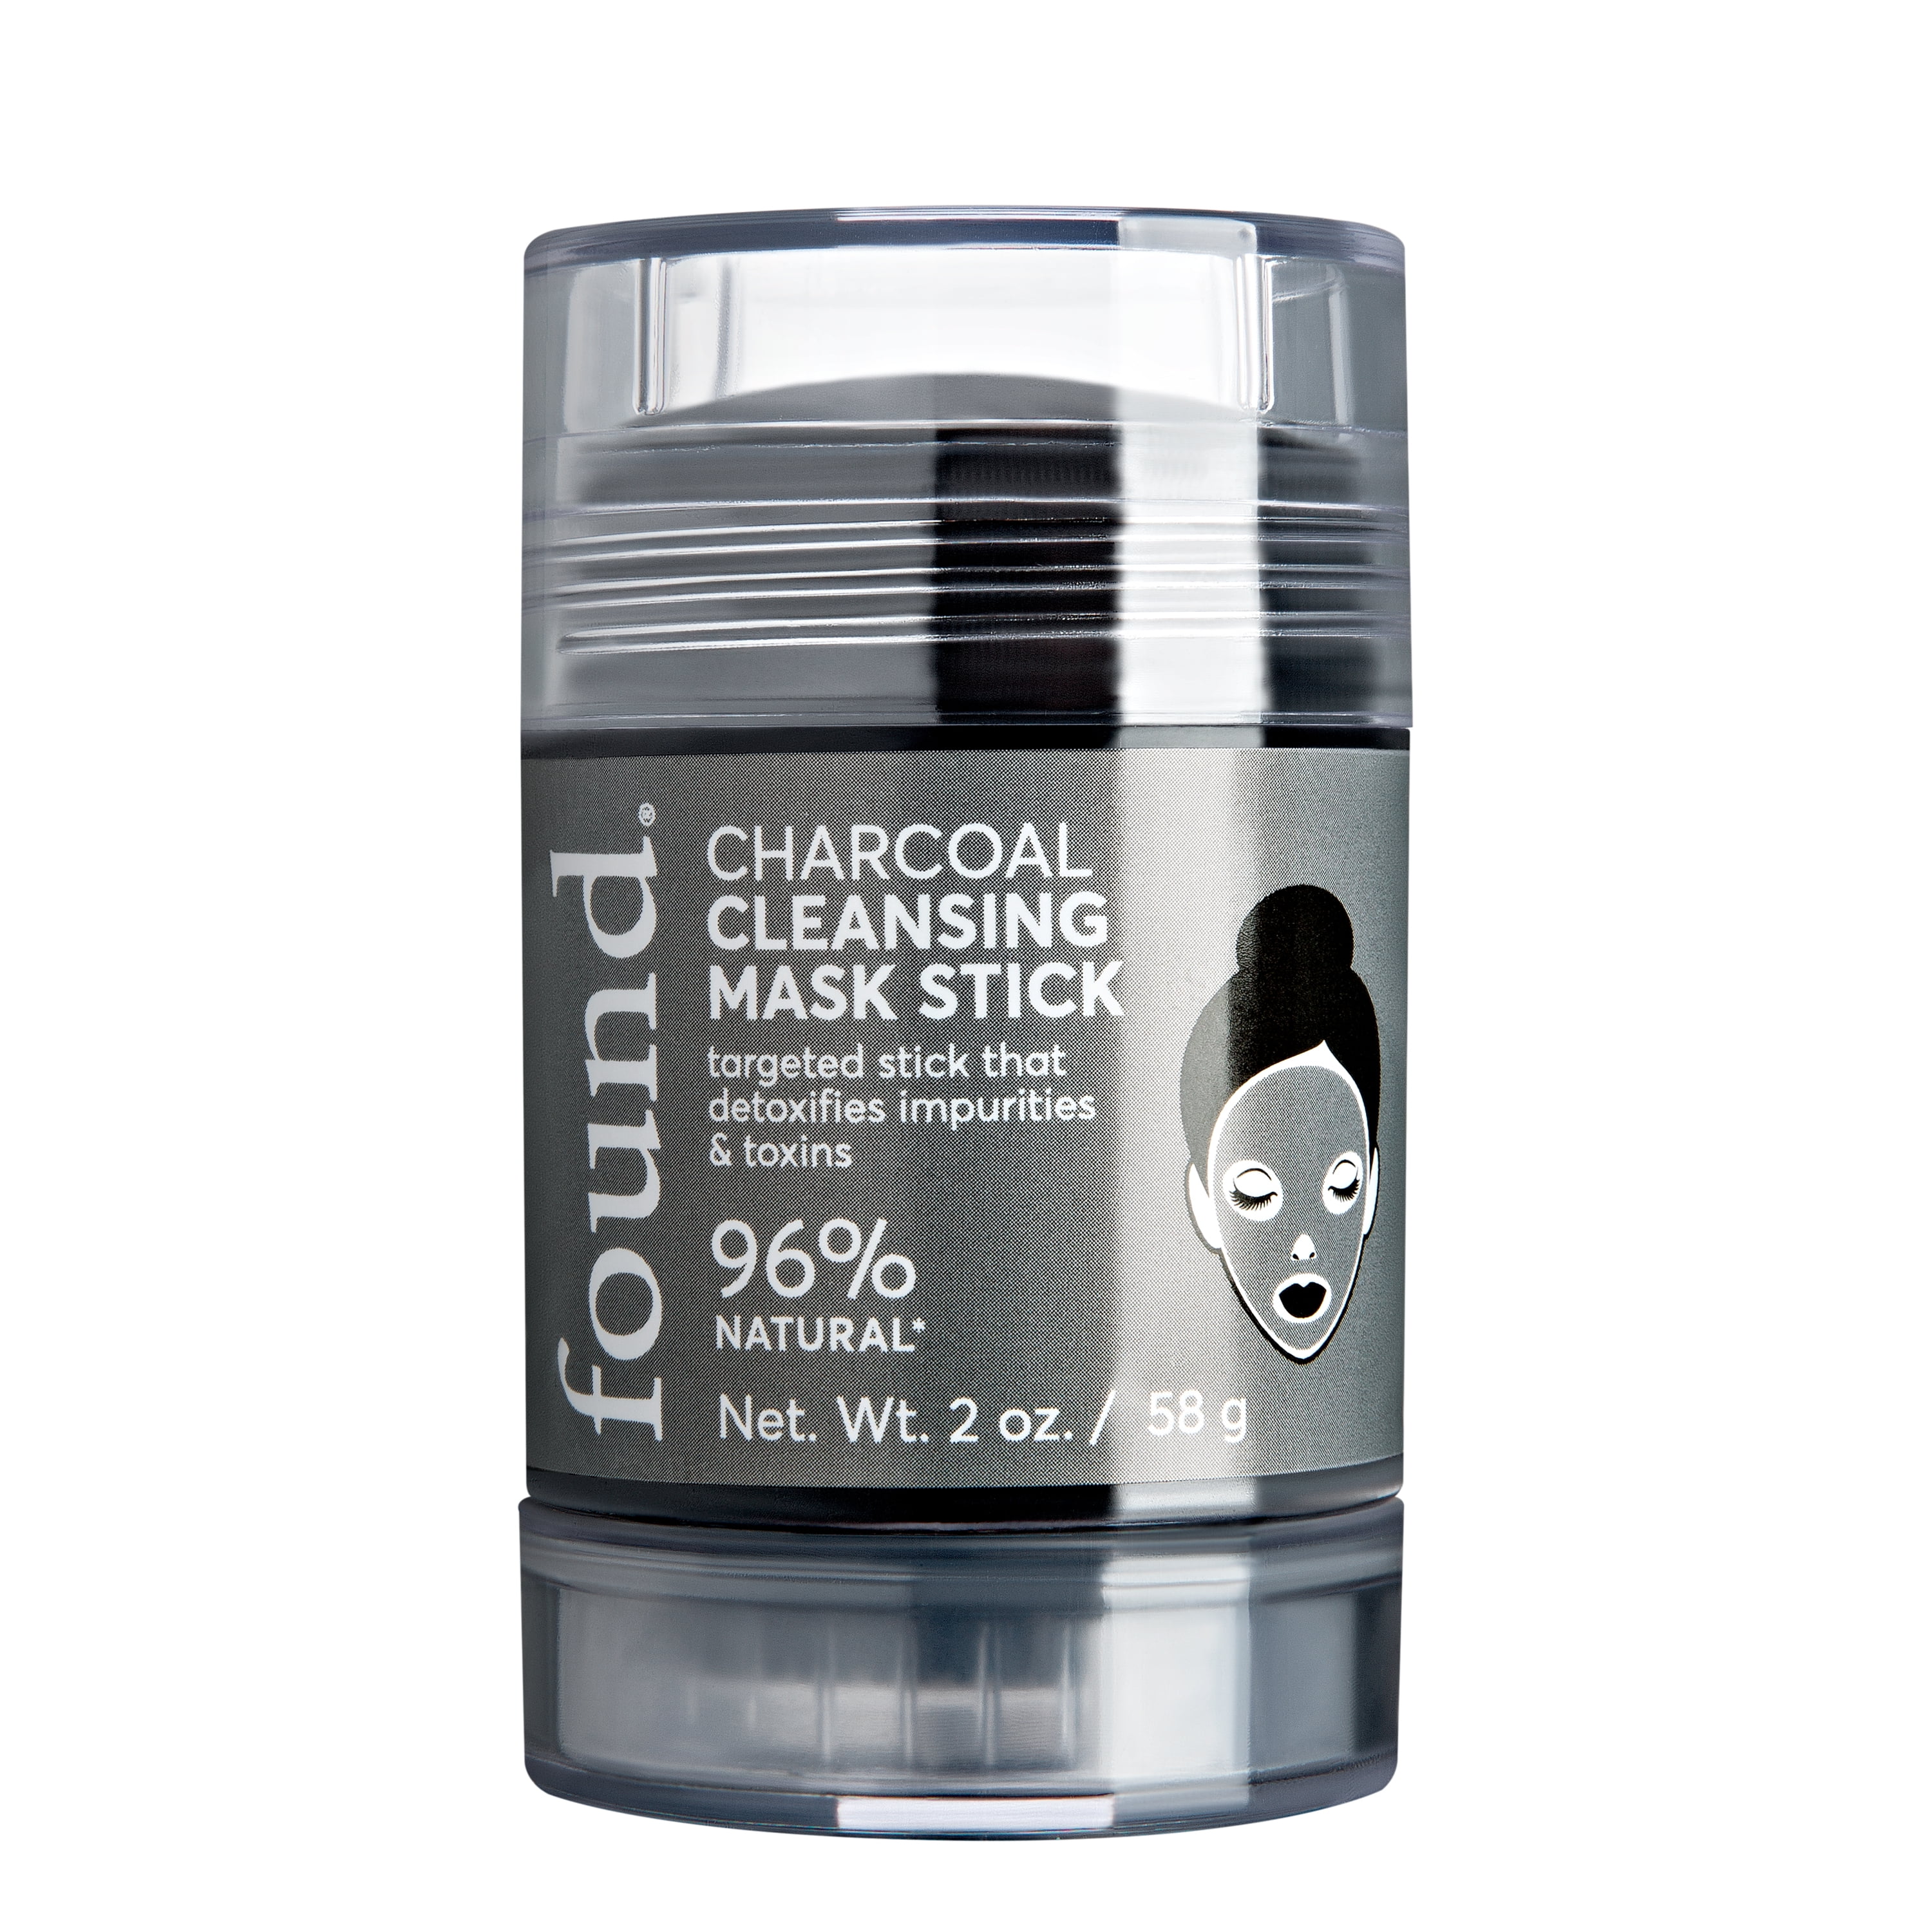 found Charcoal Mask Cleansing oz Stick Natural, 96% 2